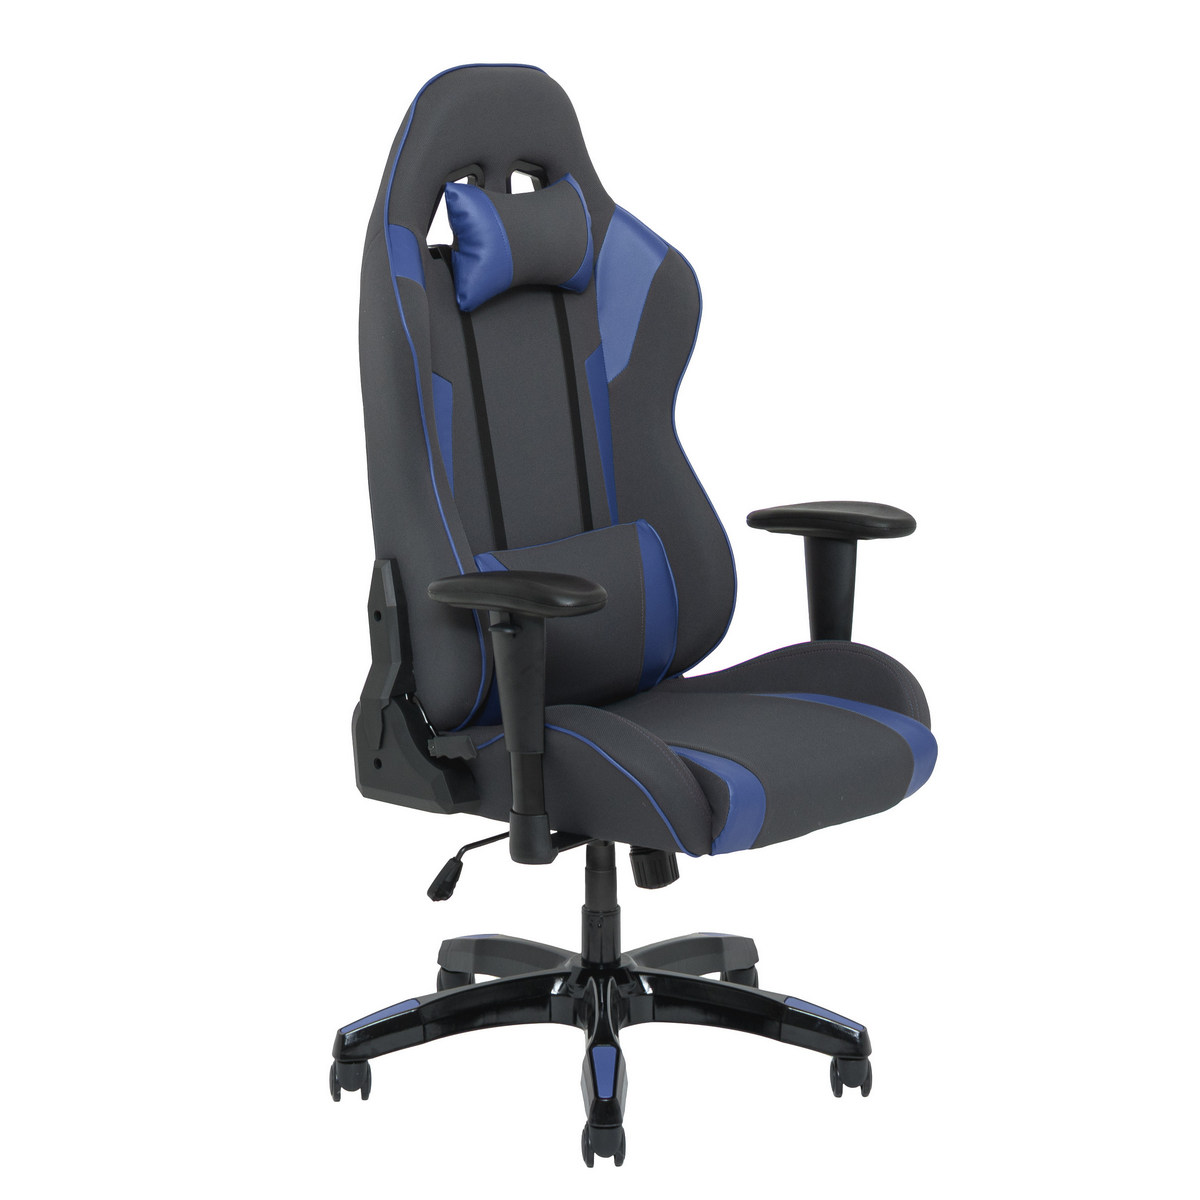 Corliving Lof-832-g Grey & Blue High Back Ergonomic Gaming Chair, Height Adjustable Arms